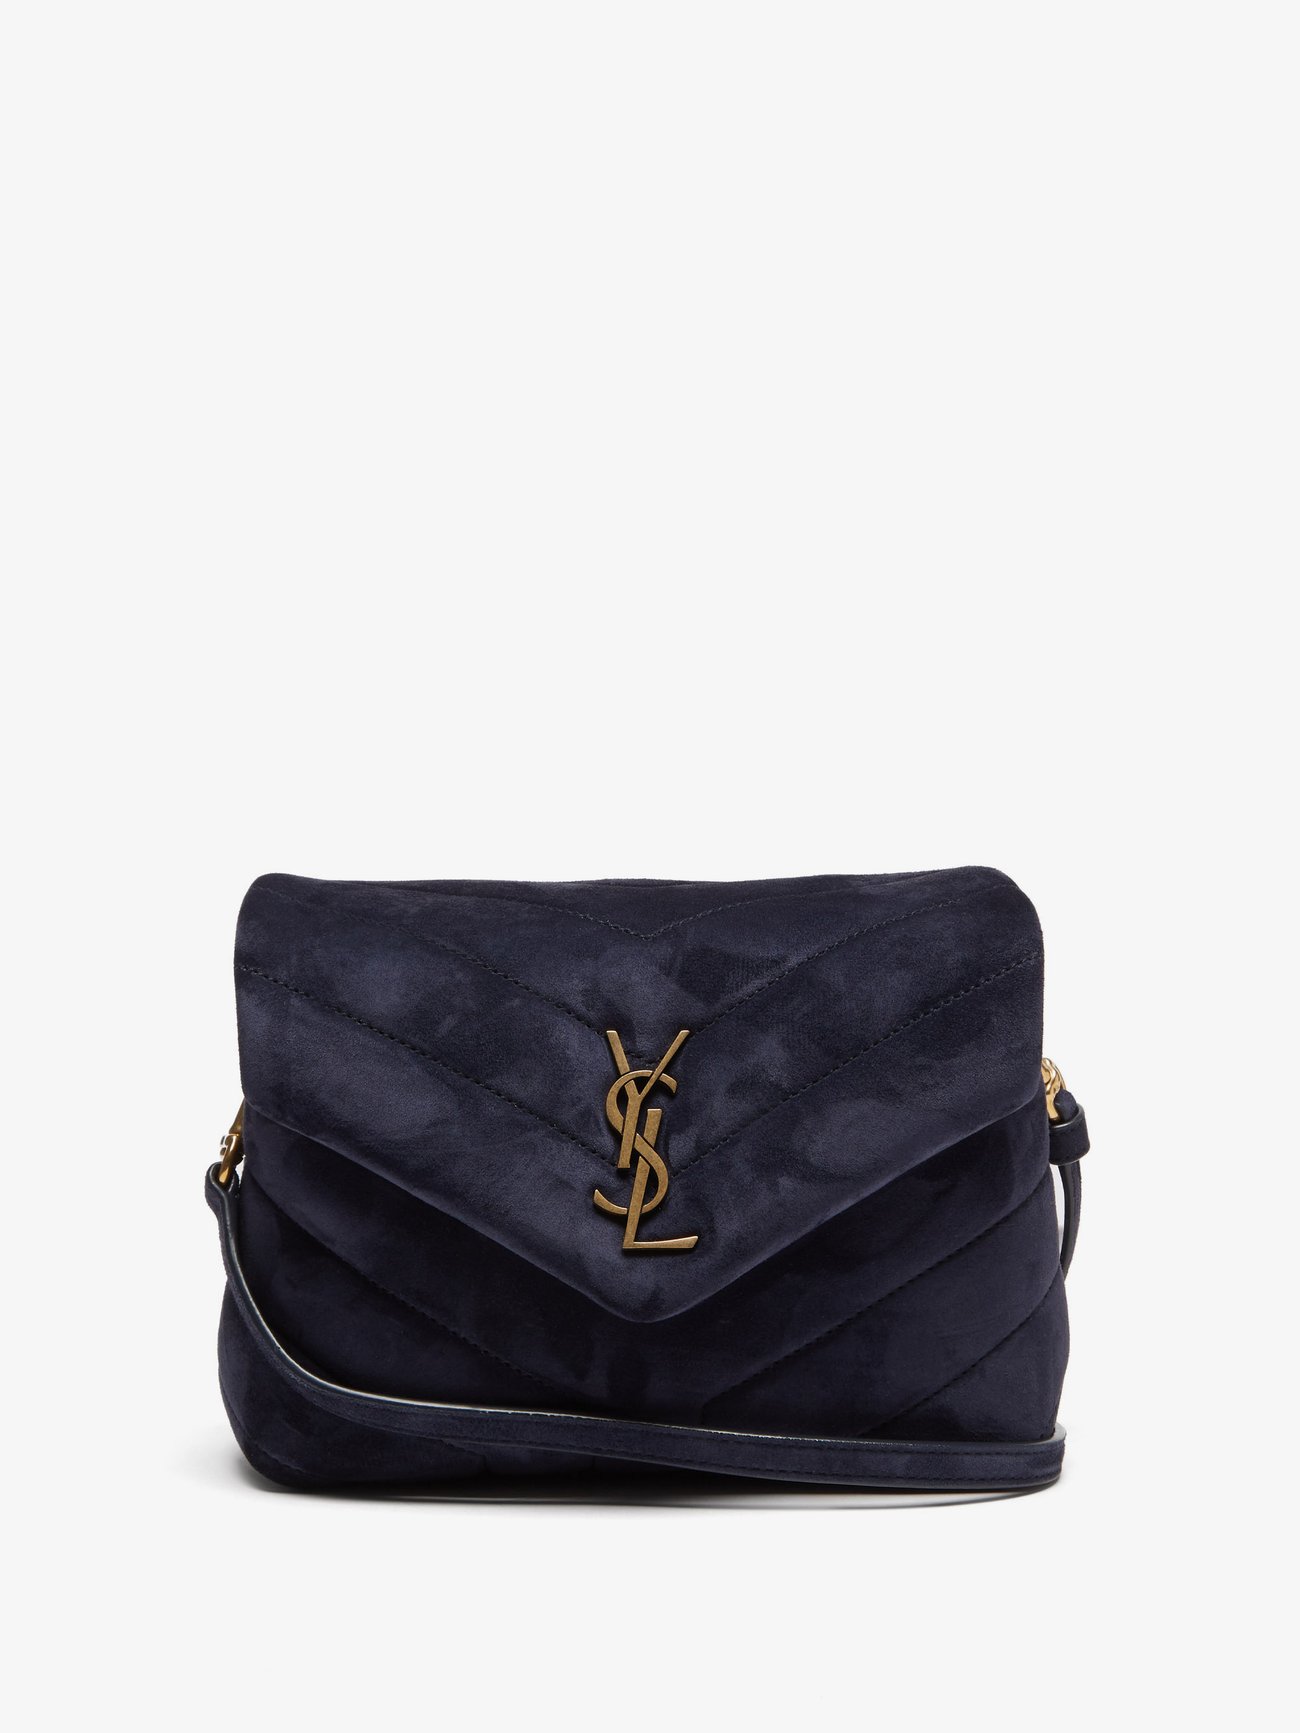 Authentic YSL Lou Lou toy bag in navy velvet. Comes